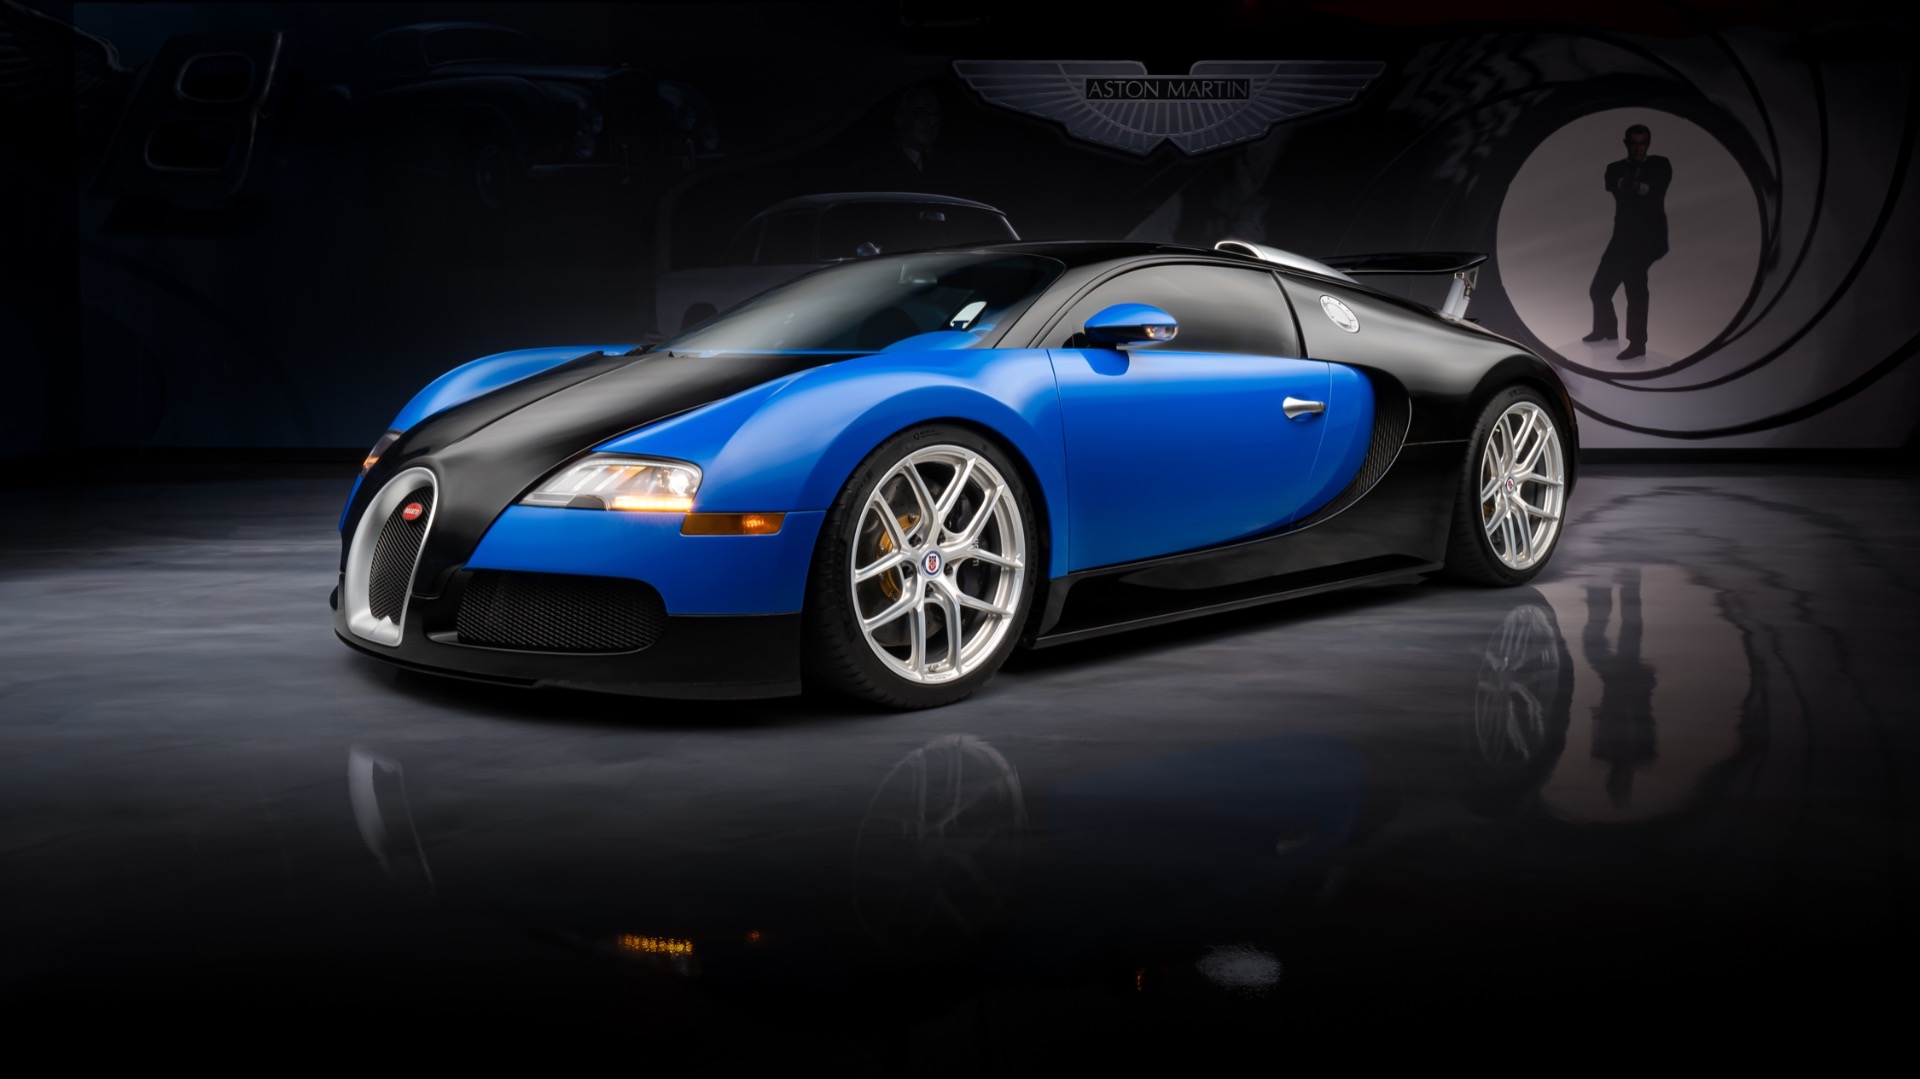 Used-2008-Bugatti-Veyron-164-Serviced-HRE-Wheels-Vitesse-Headlights-All-Stock-Parts-Included-Full-PPF